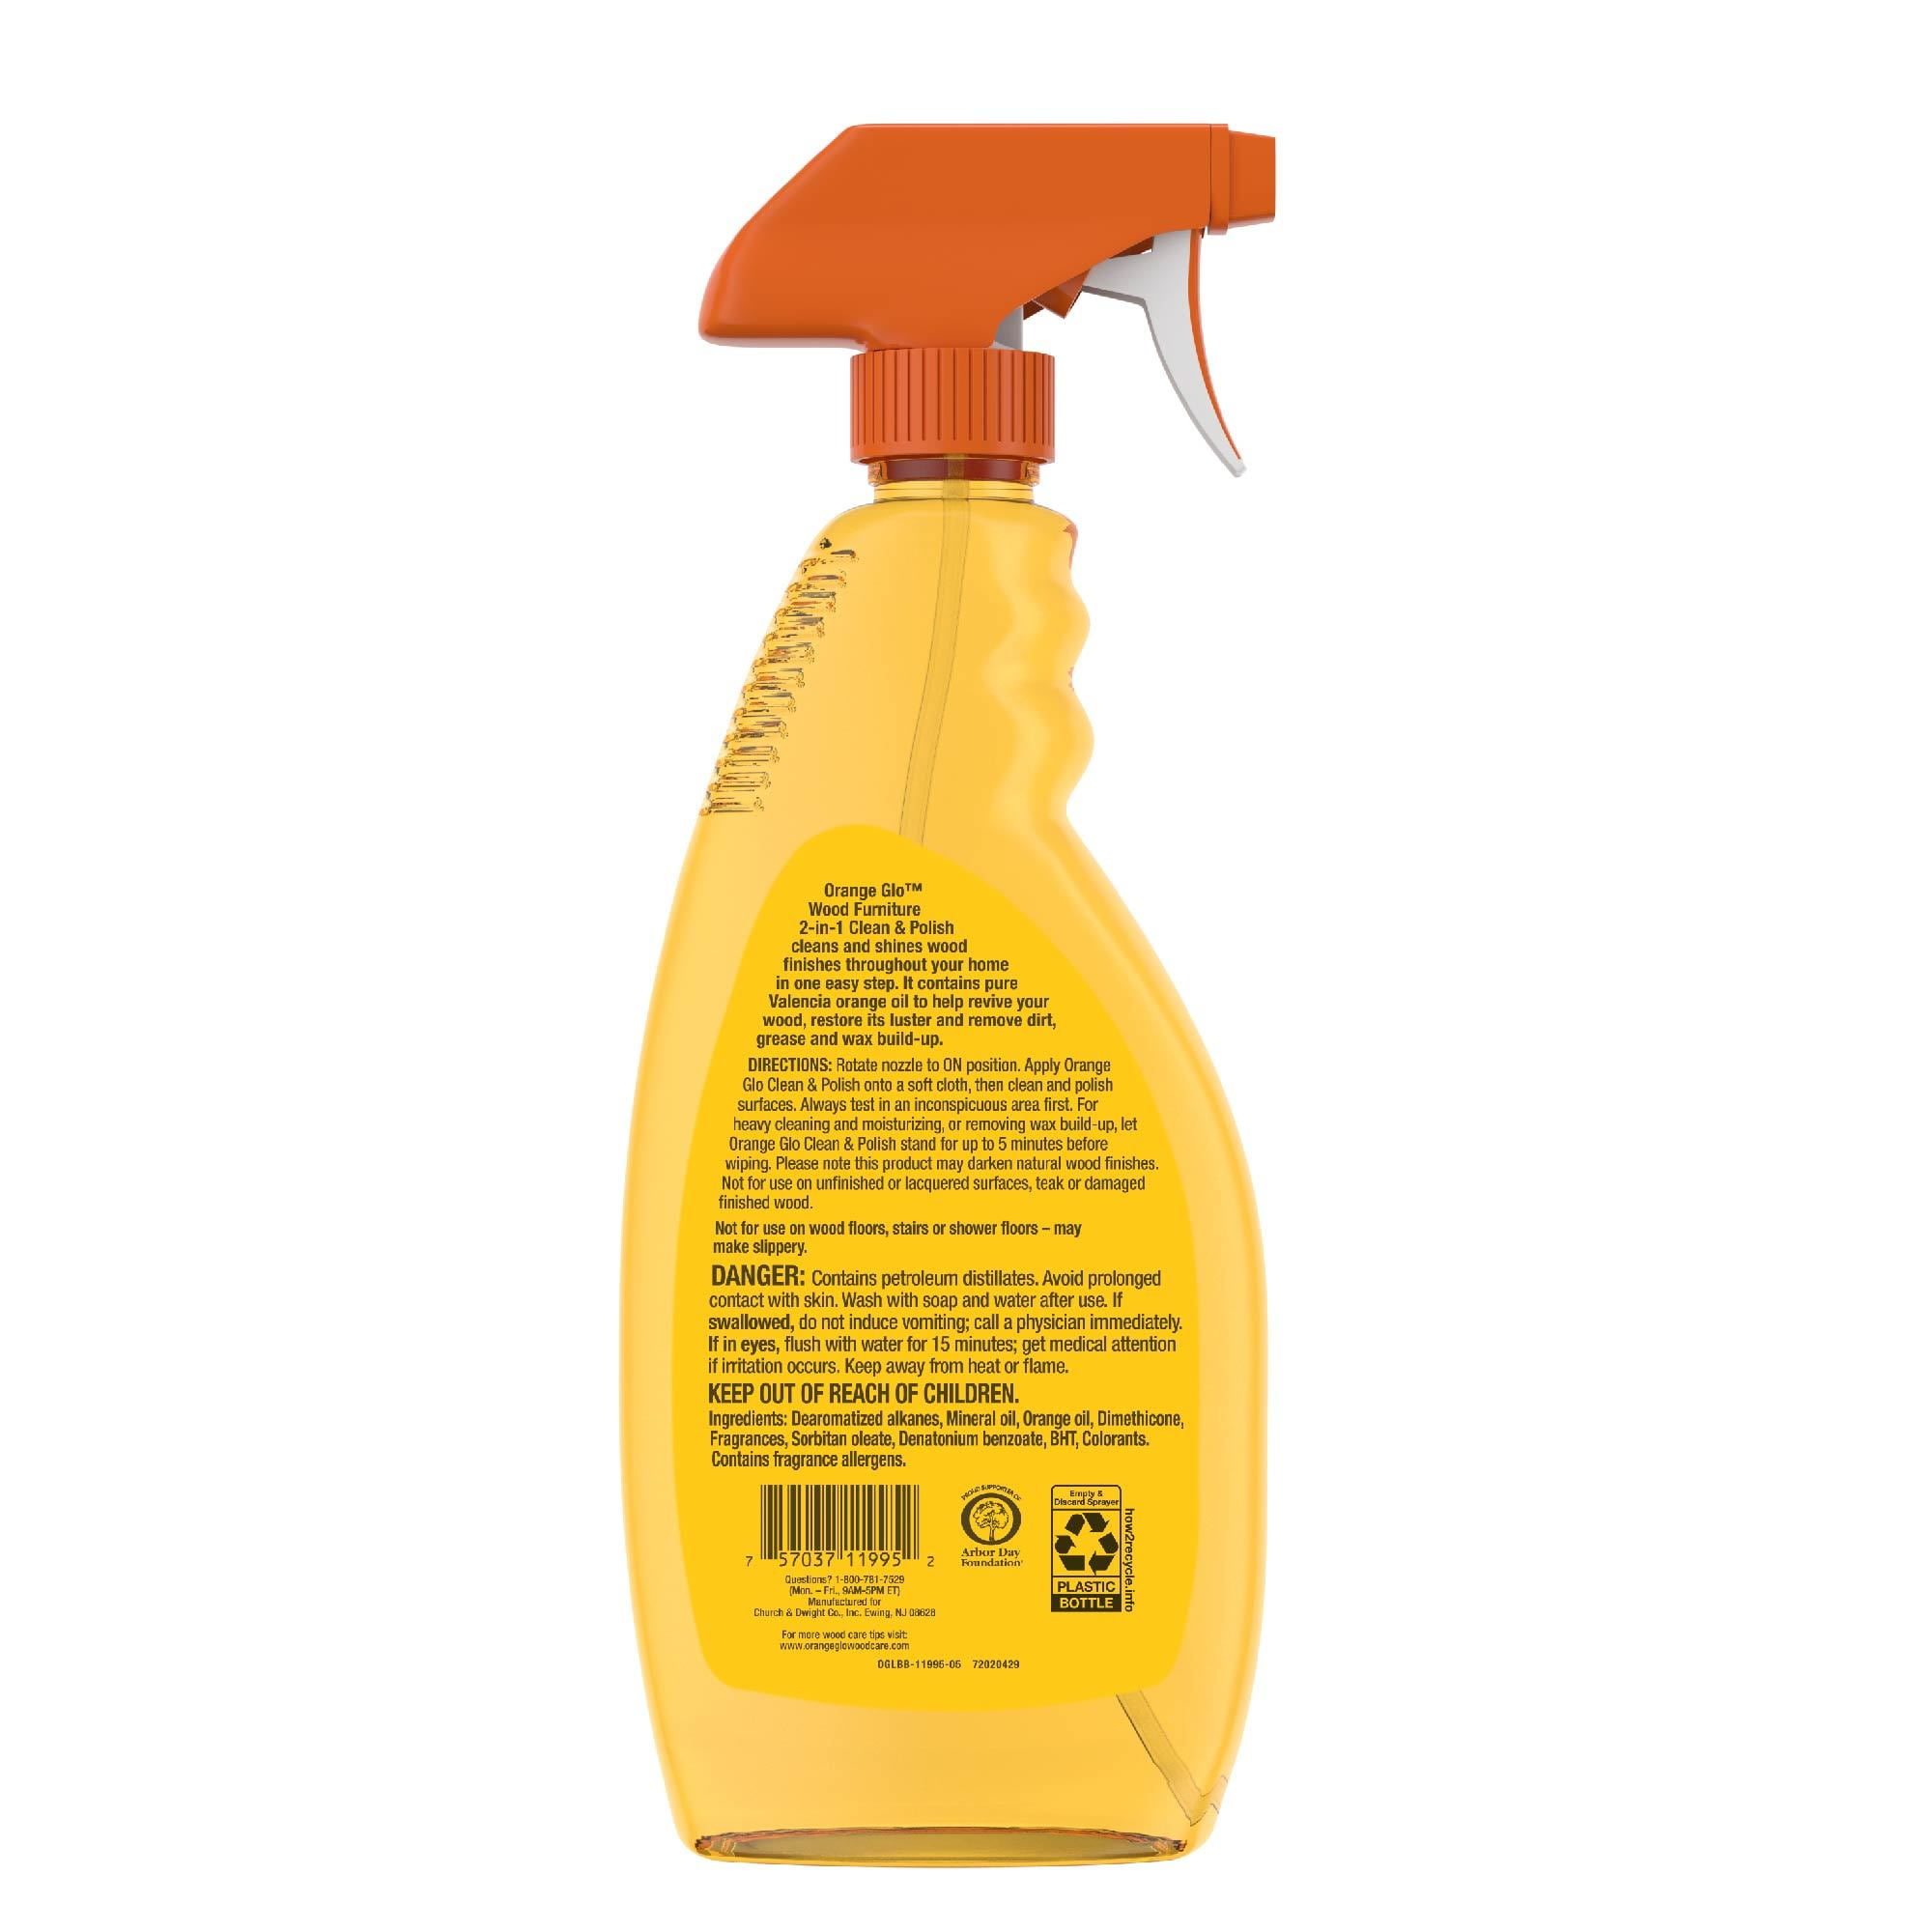 Car Wash Gallon - Soap and Conditioner Clean and Condition Paint Without Damaging Wax Protection - 1 Gallon 128oz TriNova